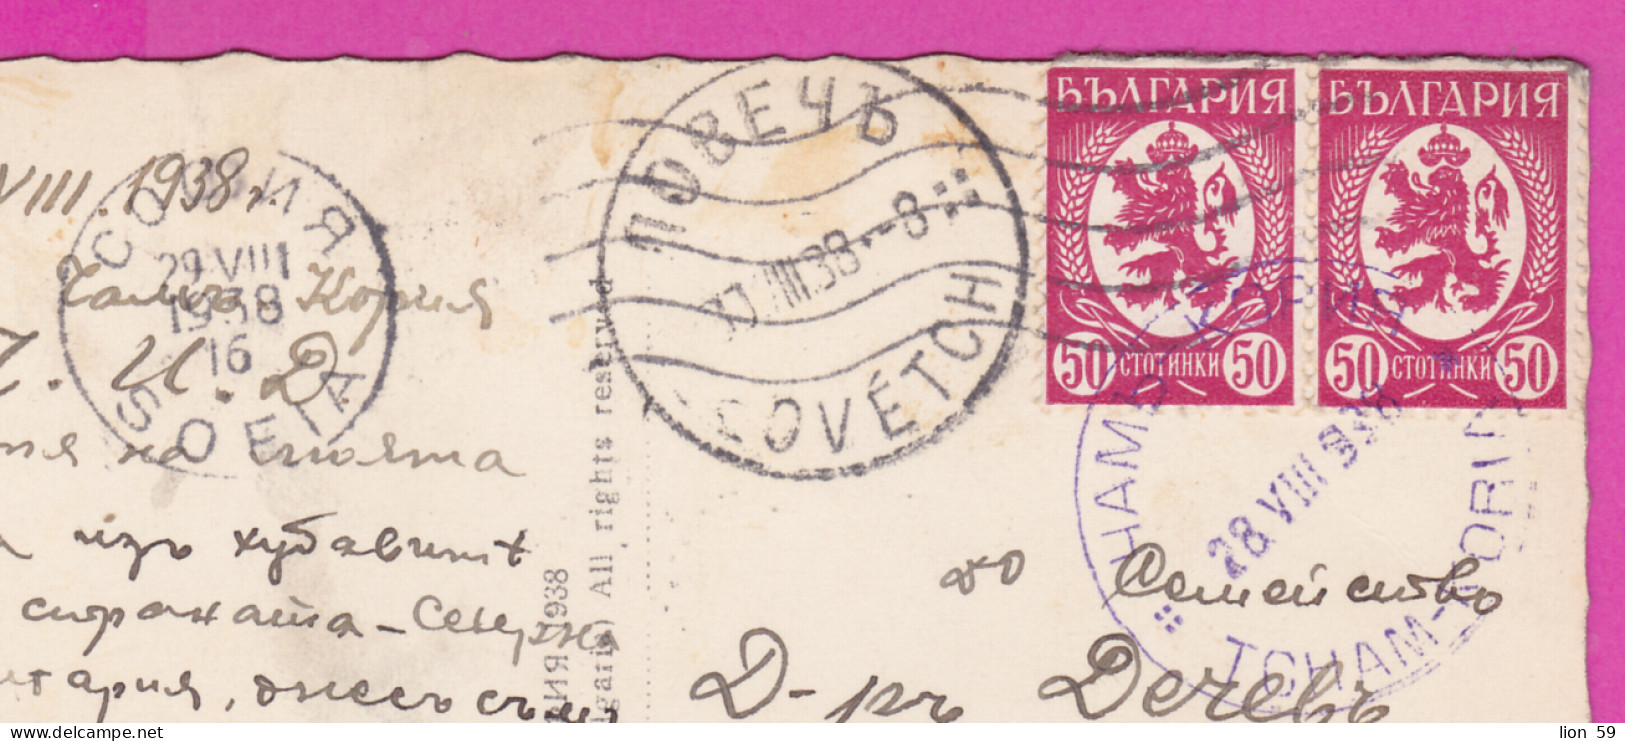 309131 / Bulgaria - Chamkoria (Borovets) - View From The Resort 66 PC 1938 USED 50+50 St. Lion Lowe Sofia - Lovech  - Lettres & Documents